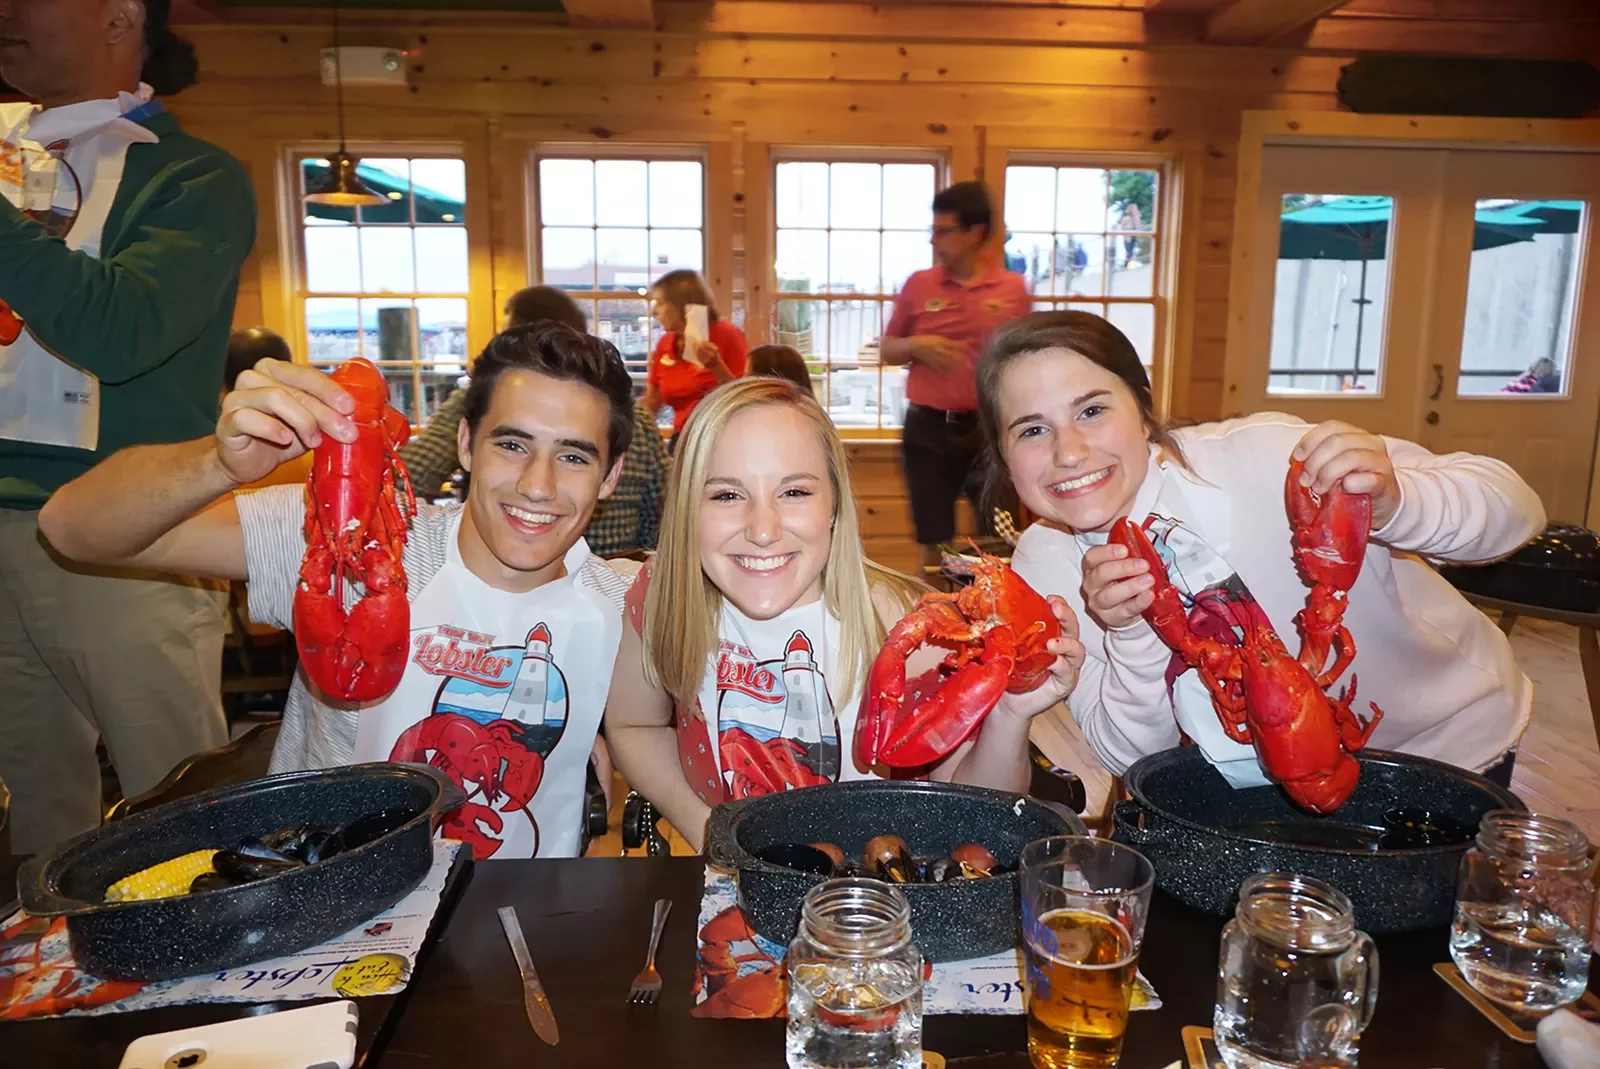 Three young guests holding up cooked lobsters during a meal.